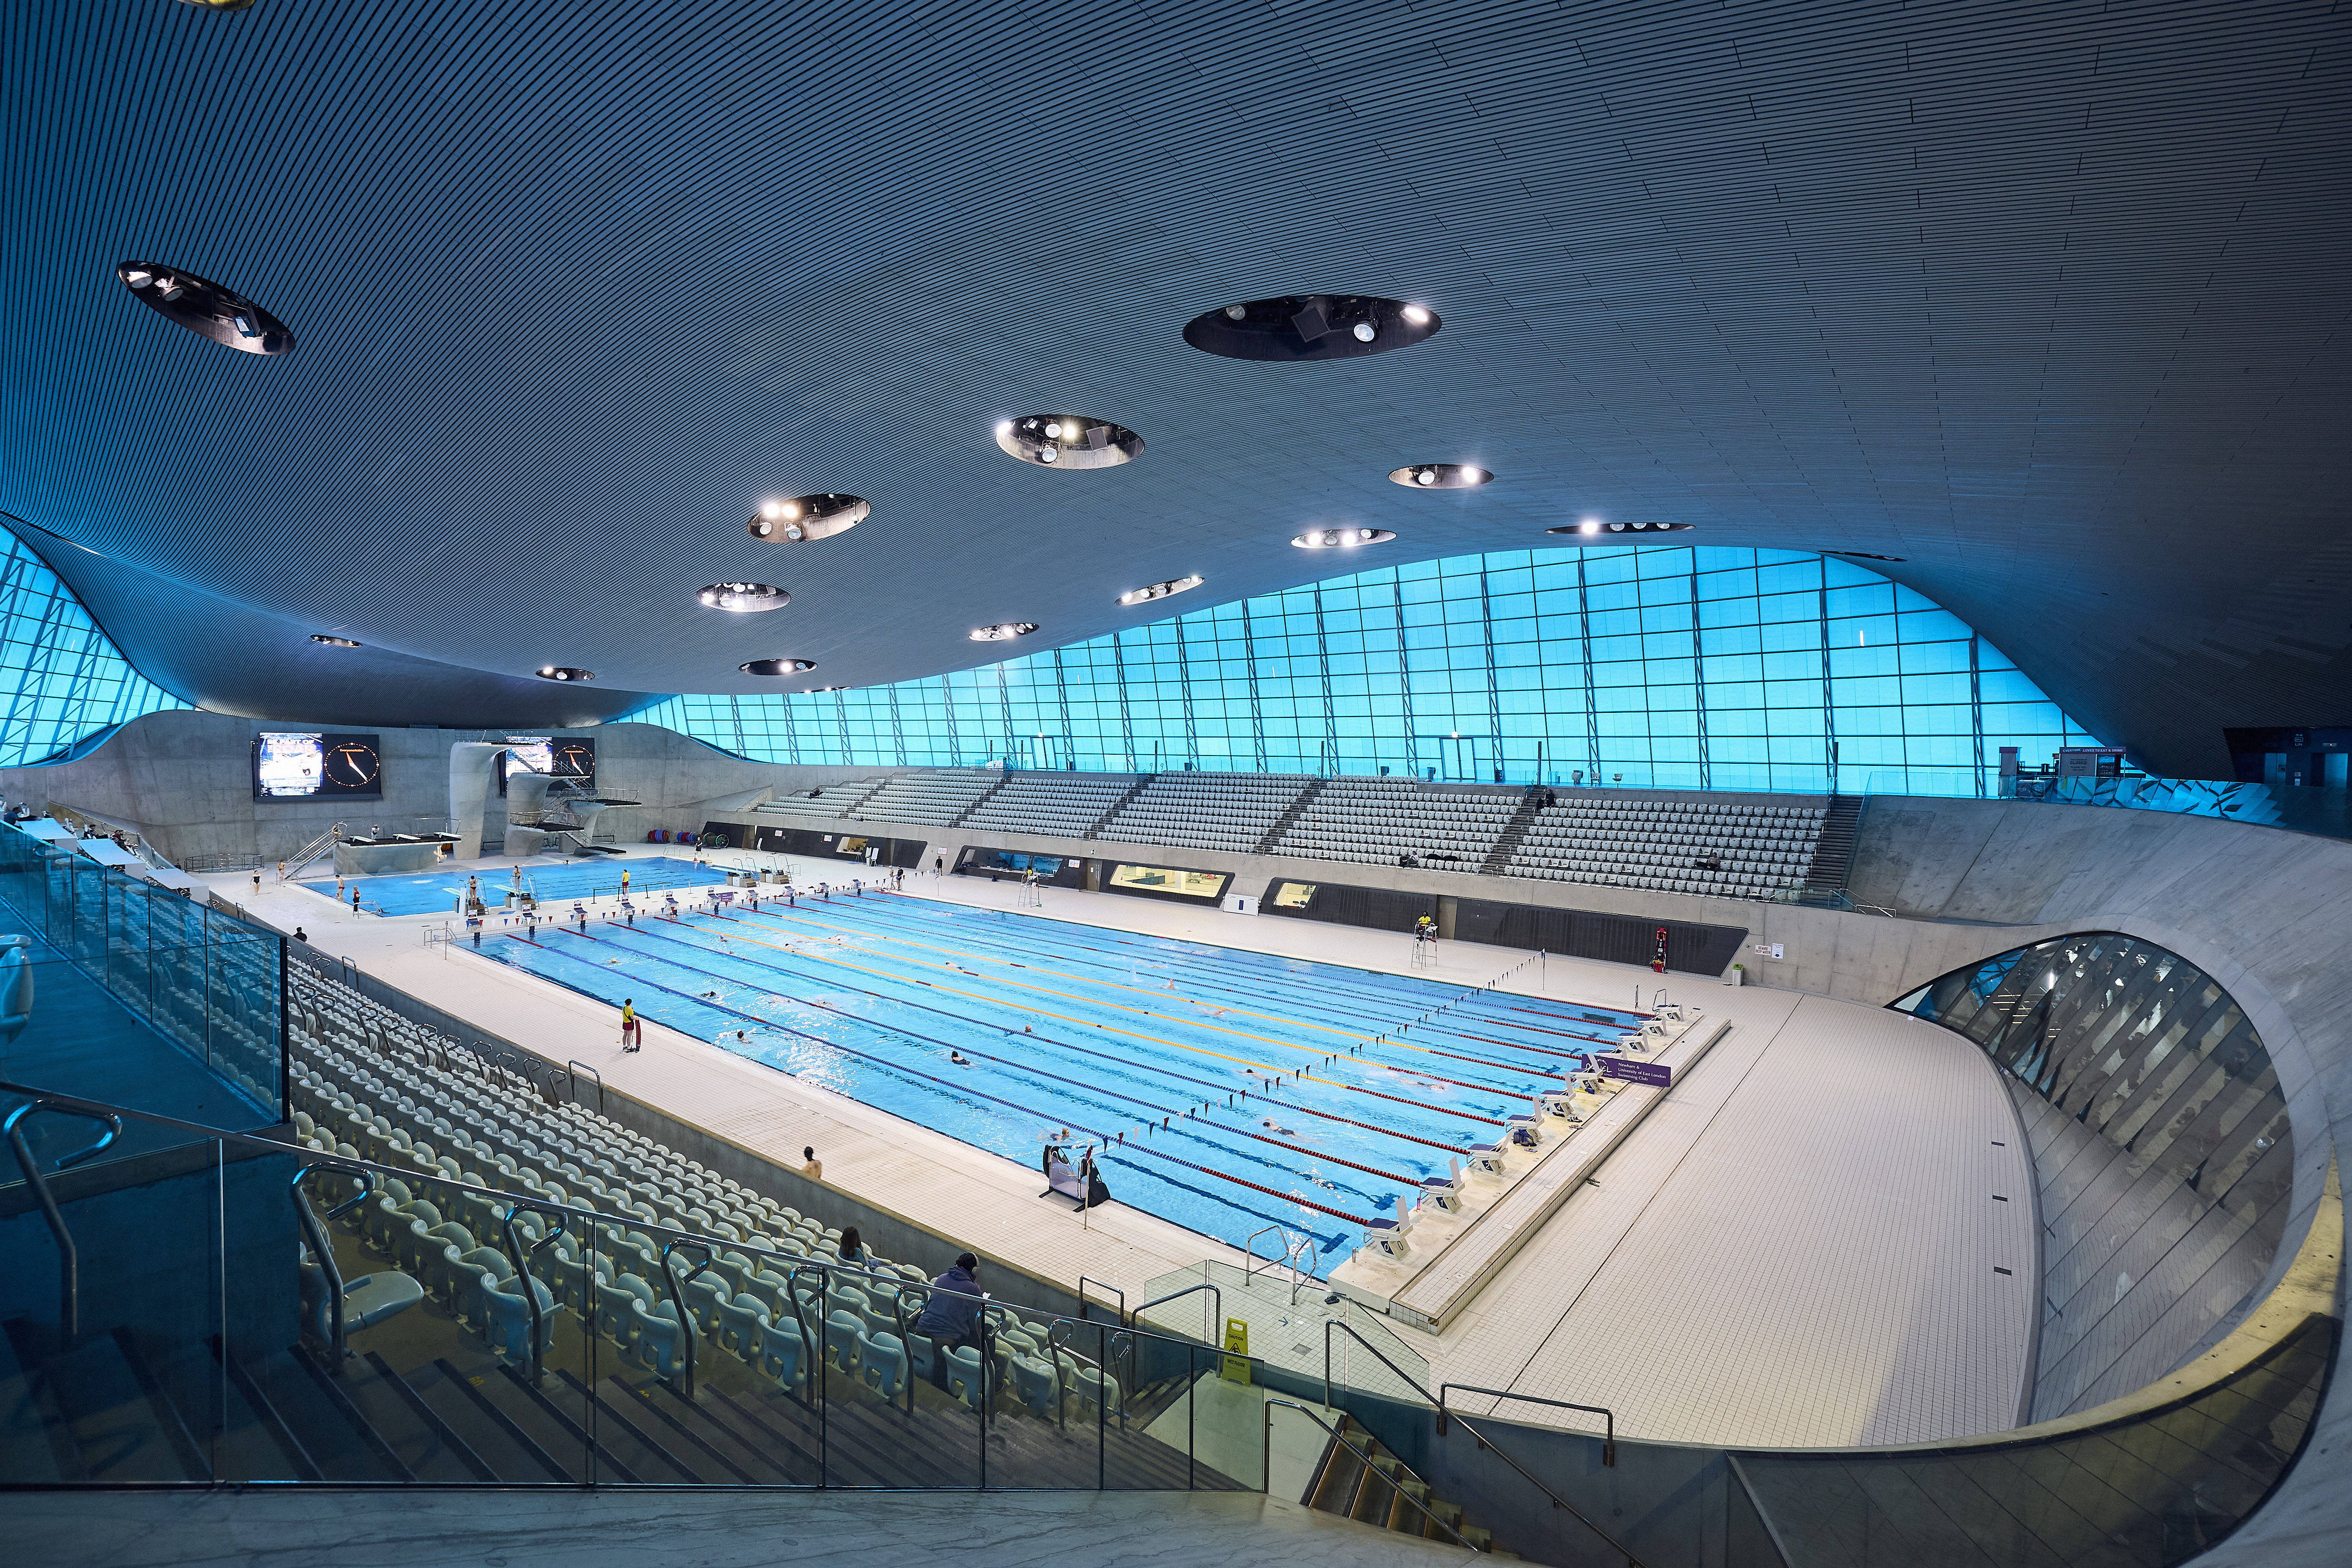 London Aquatics Centre to host National Fitness Day kick-off as summer of sport returns to communities